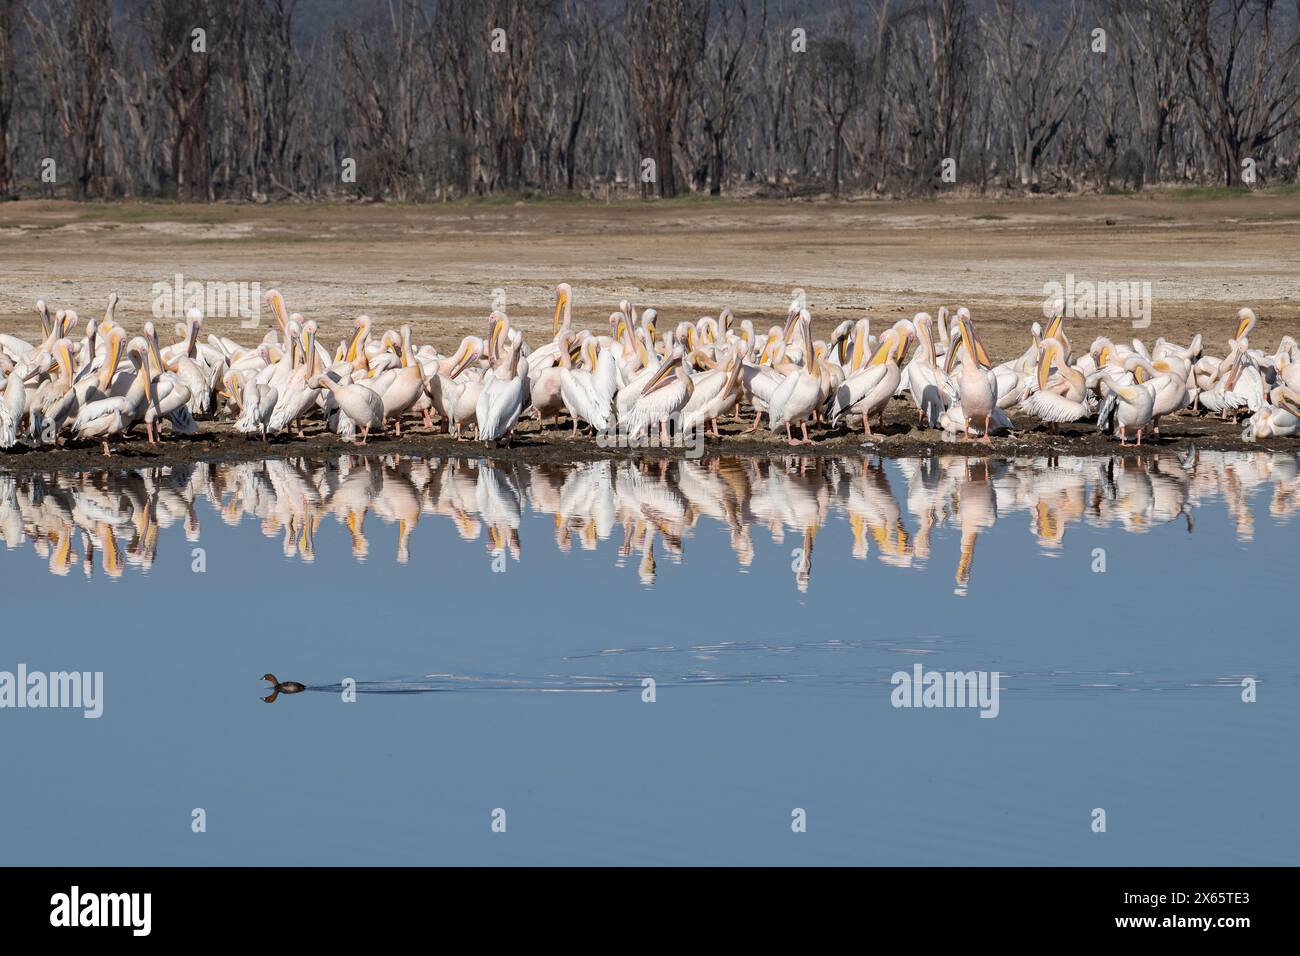 A tiny duck swims by a large group of pelican reflected in the c Stock Photo